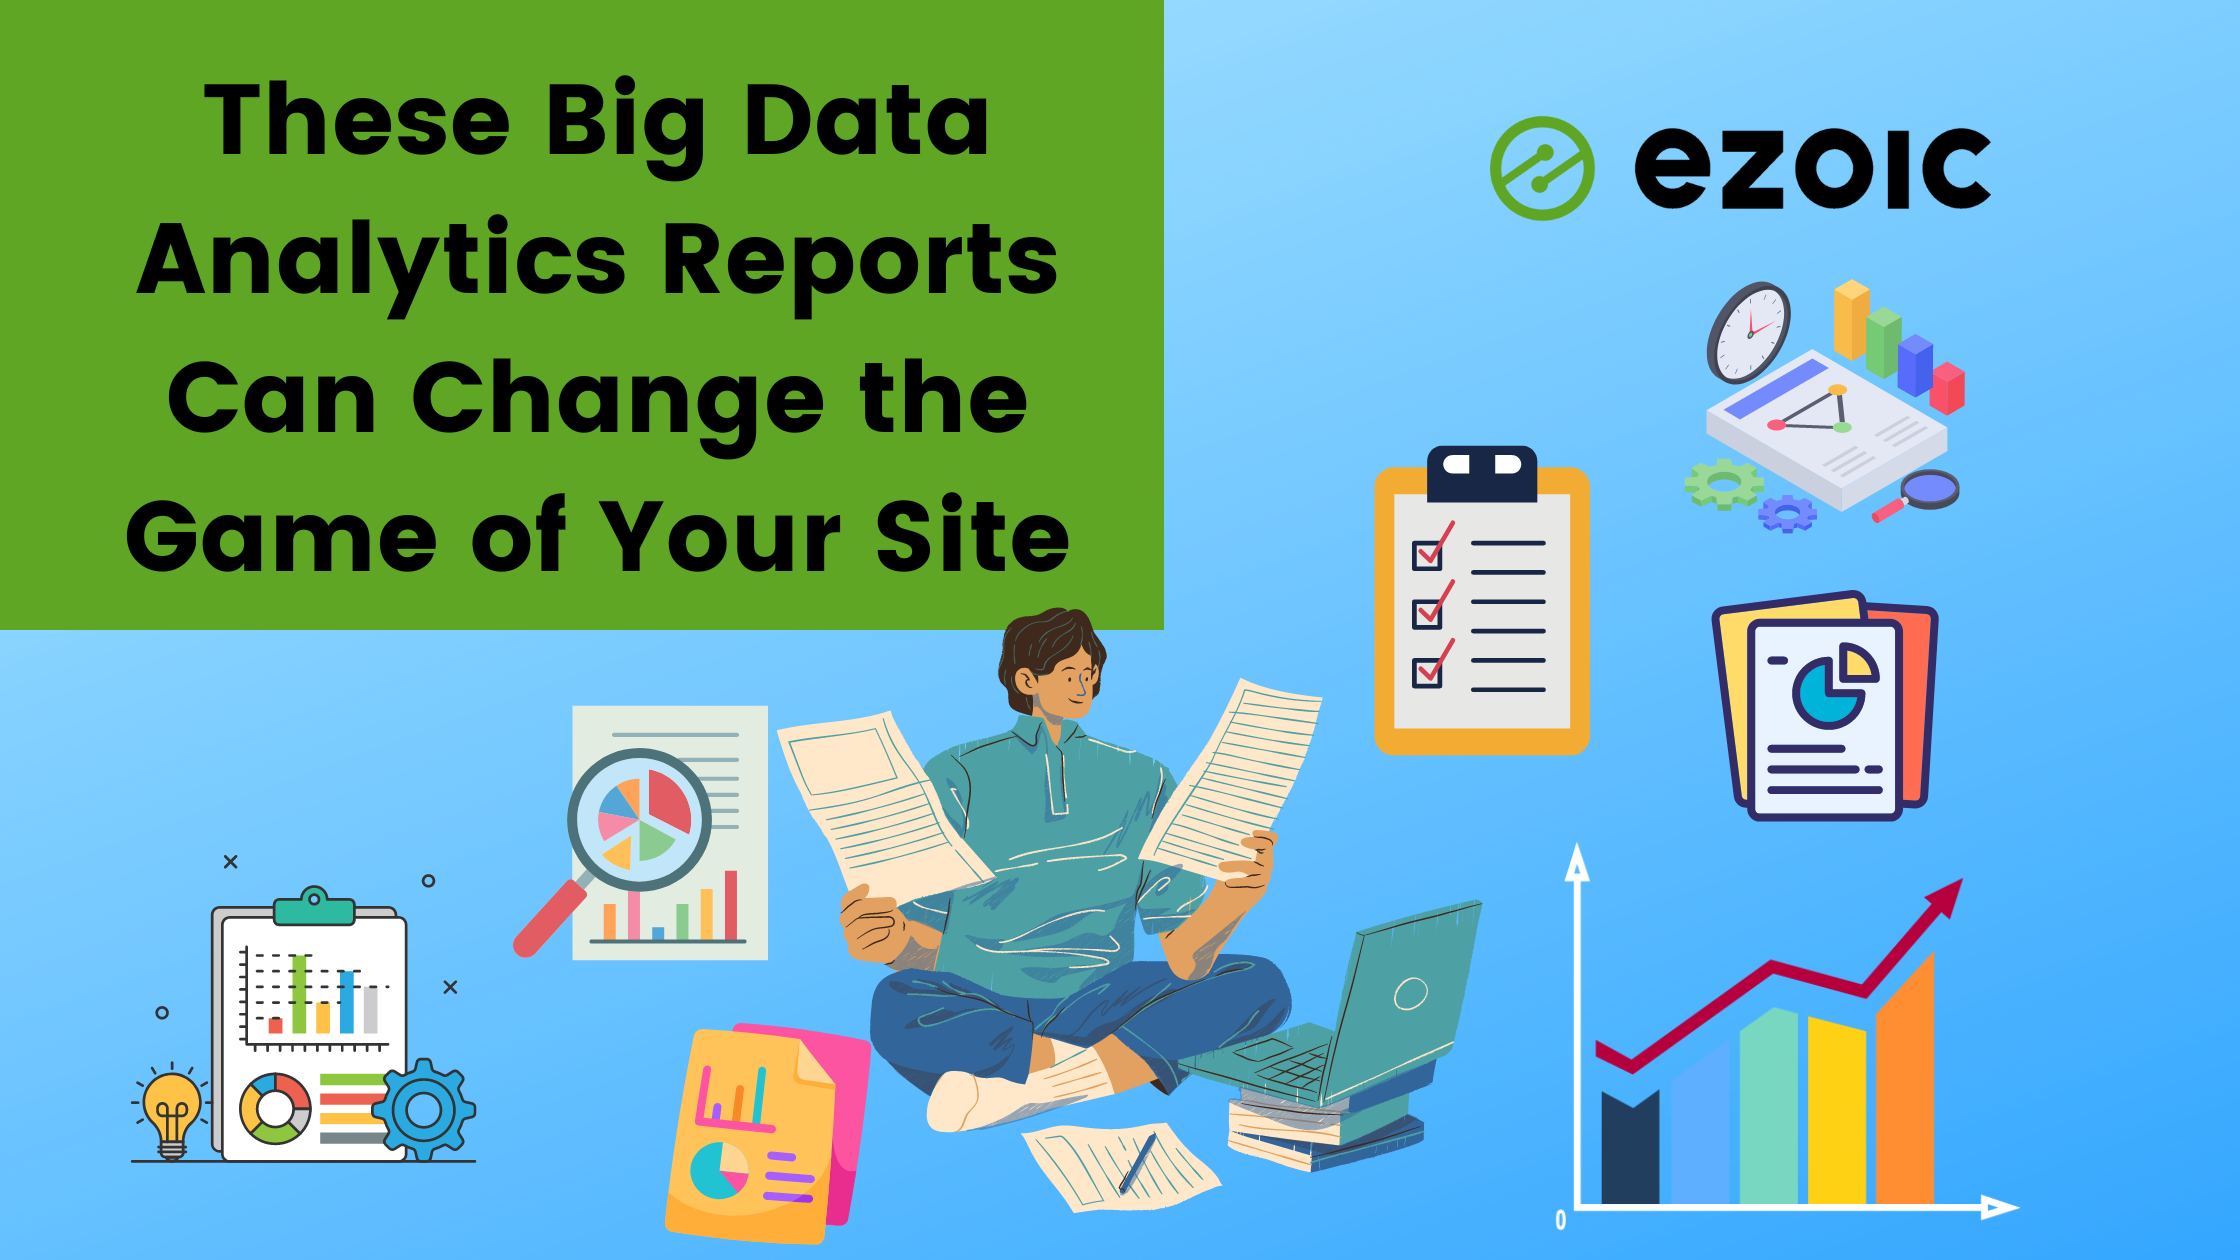 <strong>These Big Data Analytics Reports Can Change the Game of Your Site</strong>